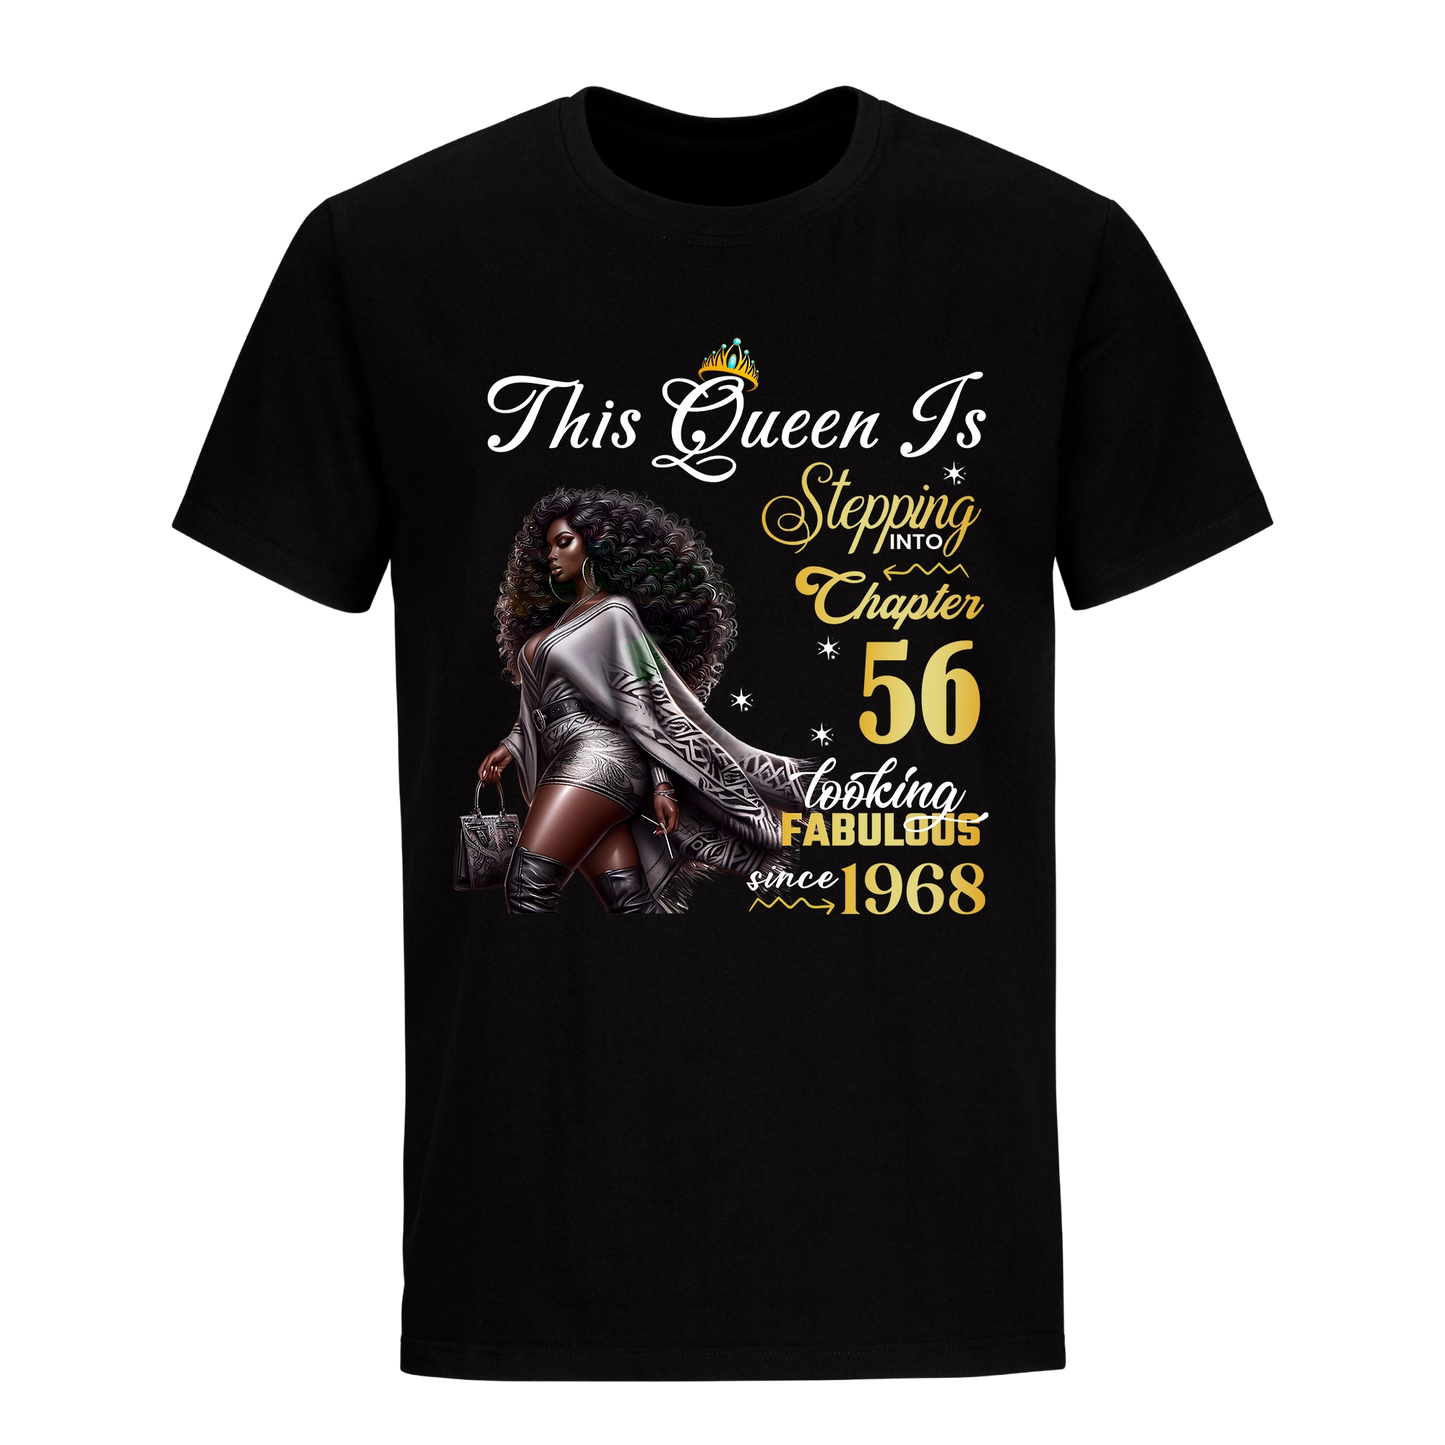 THIS QUEEN IS FABULOUS 56 UNISEX SHIRT